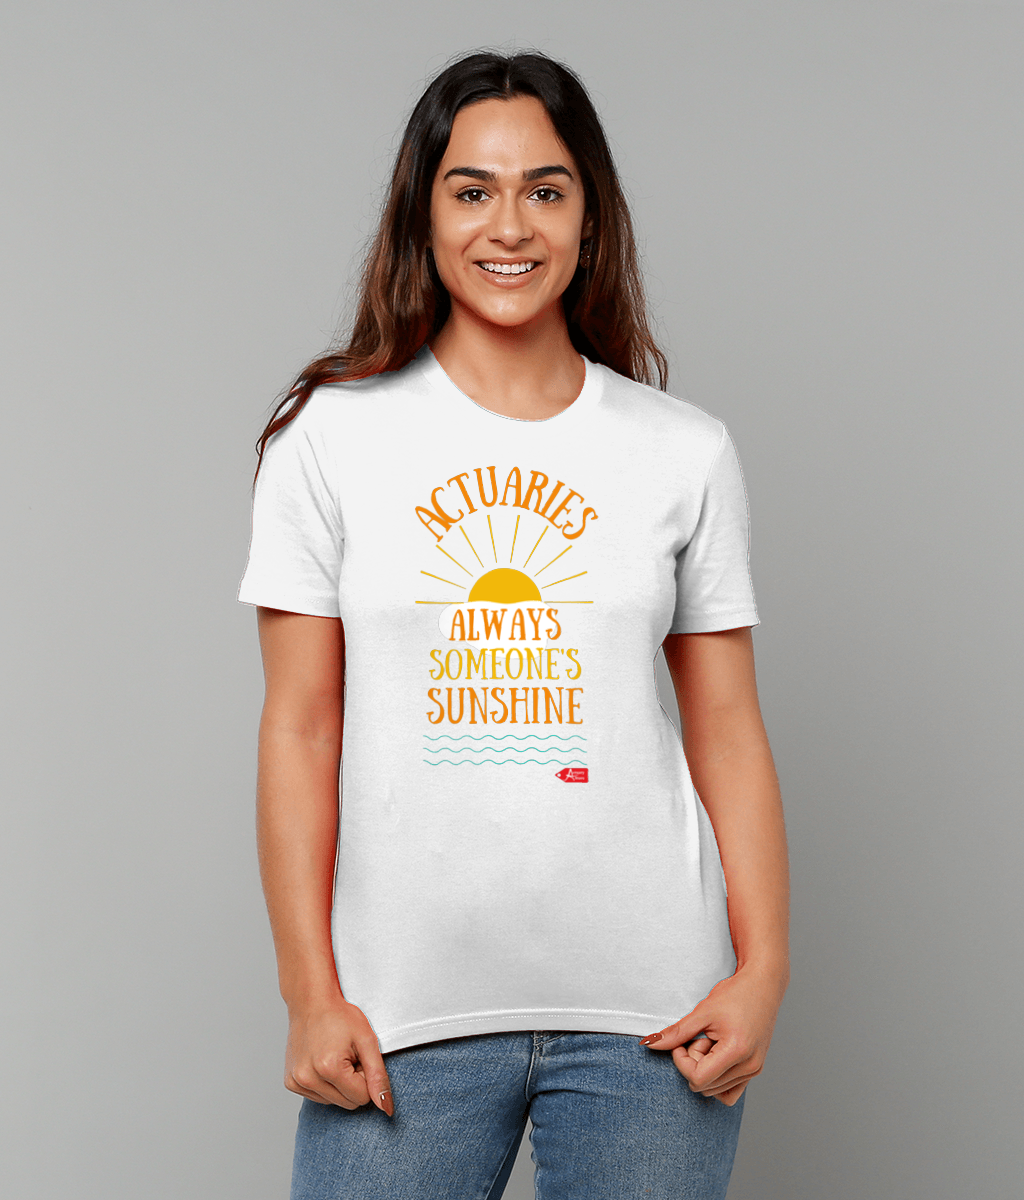 Actuaries Always Someone's Sunshine T-Shirt (Black and White Variants)